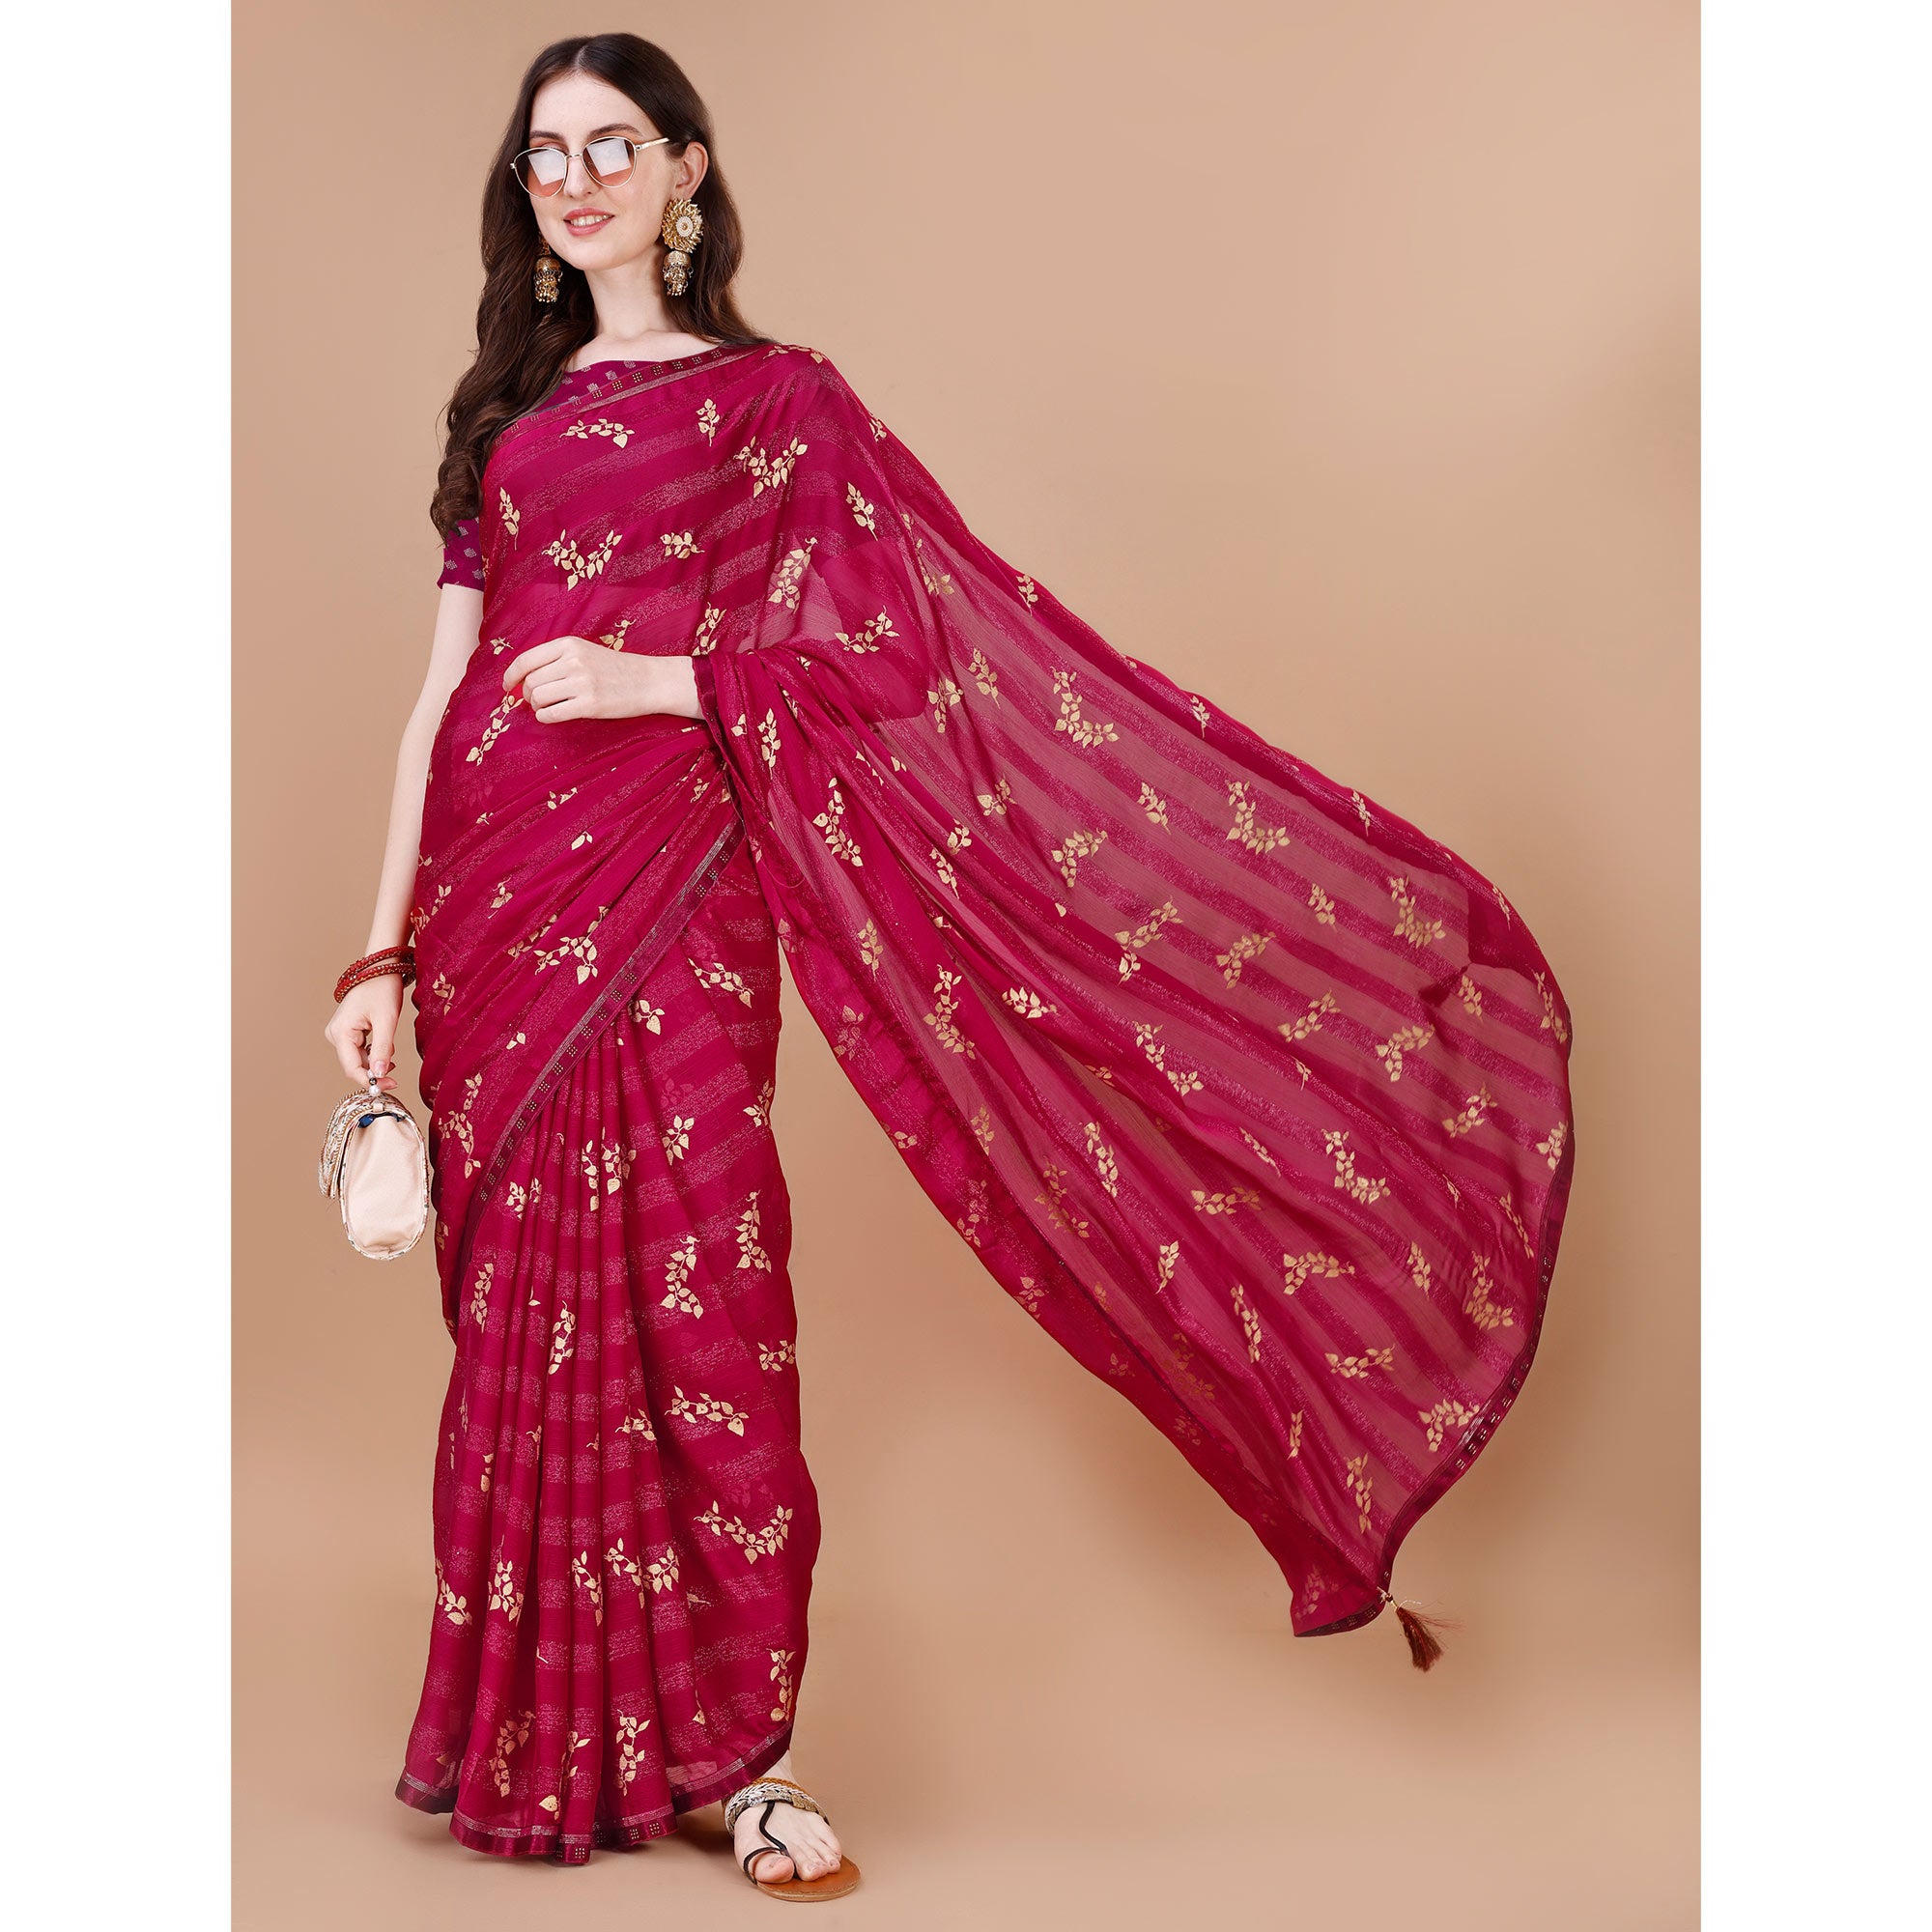 Pink Foil Printed Chiffon Saree With Lace Border